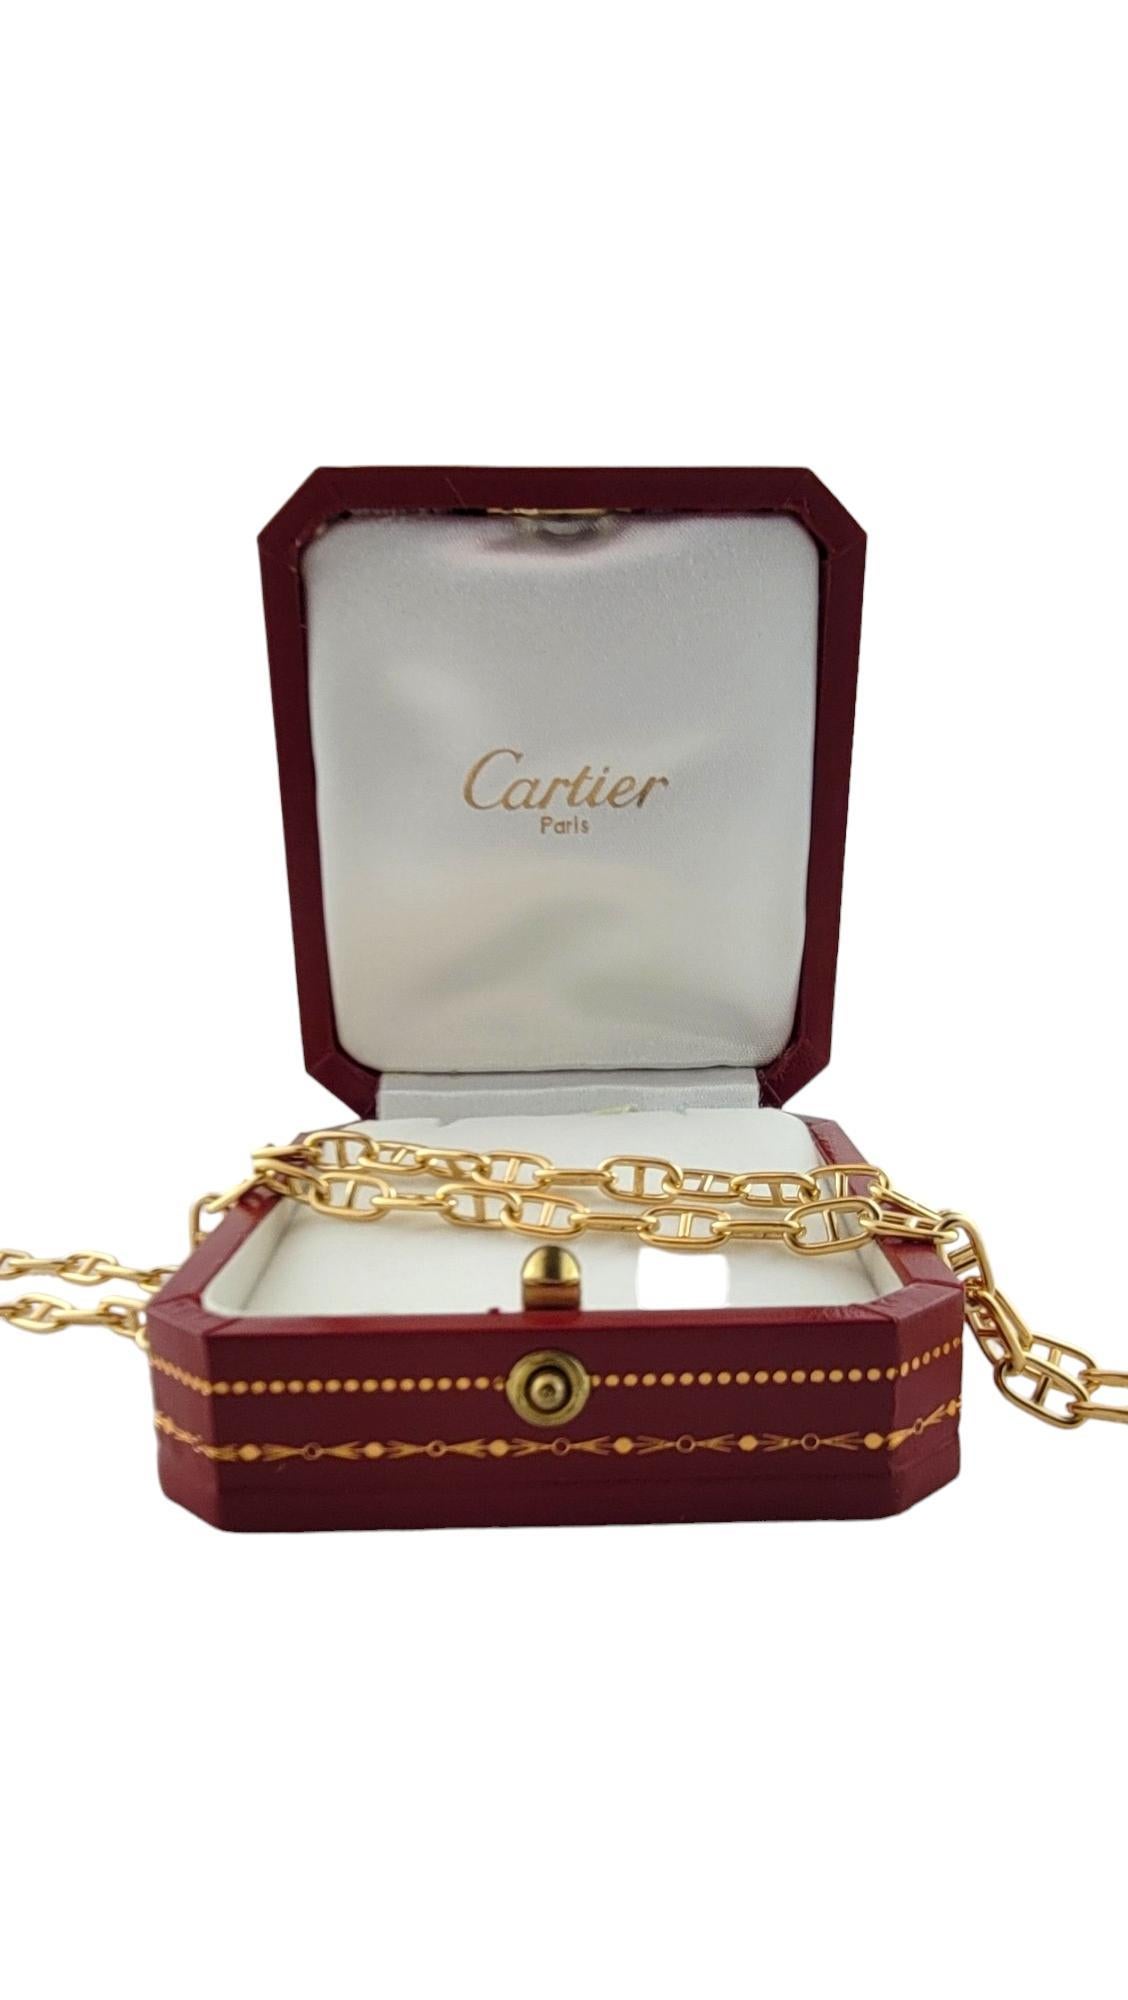 Cartier 18K Yellow Gold Mariner Chain With Box

Exquisite Cartier mariner chain in 18 karat yellow gold with Cartier box. 

**Spring ring appears to have been replaced.**

Hallmark: Cartier 211278 750

Weight: 27.45 g/ 17.65 dwt.

Chain Length: 17.5